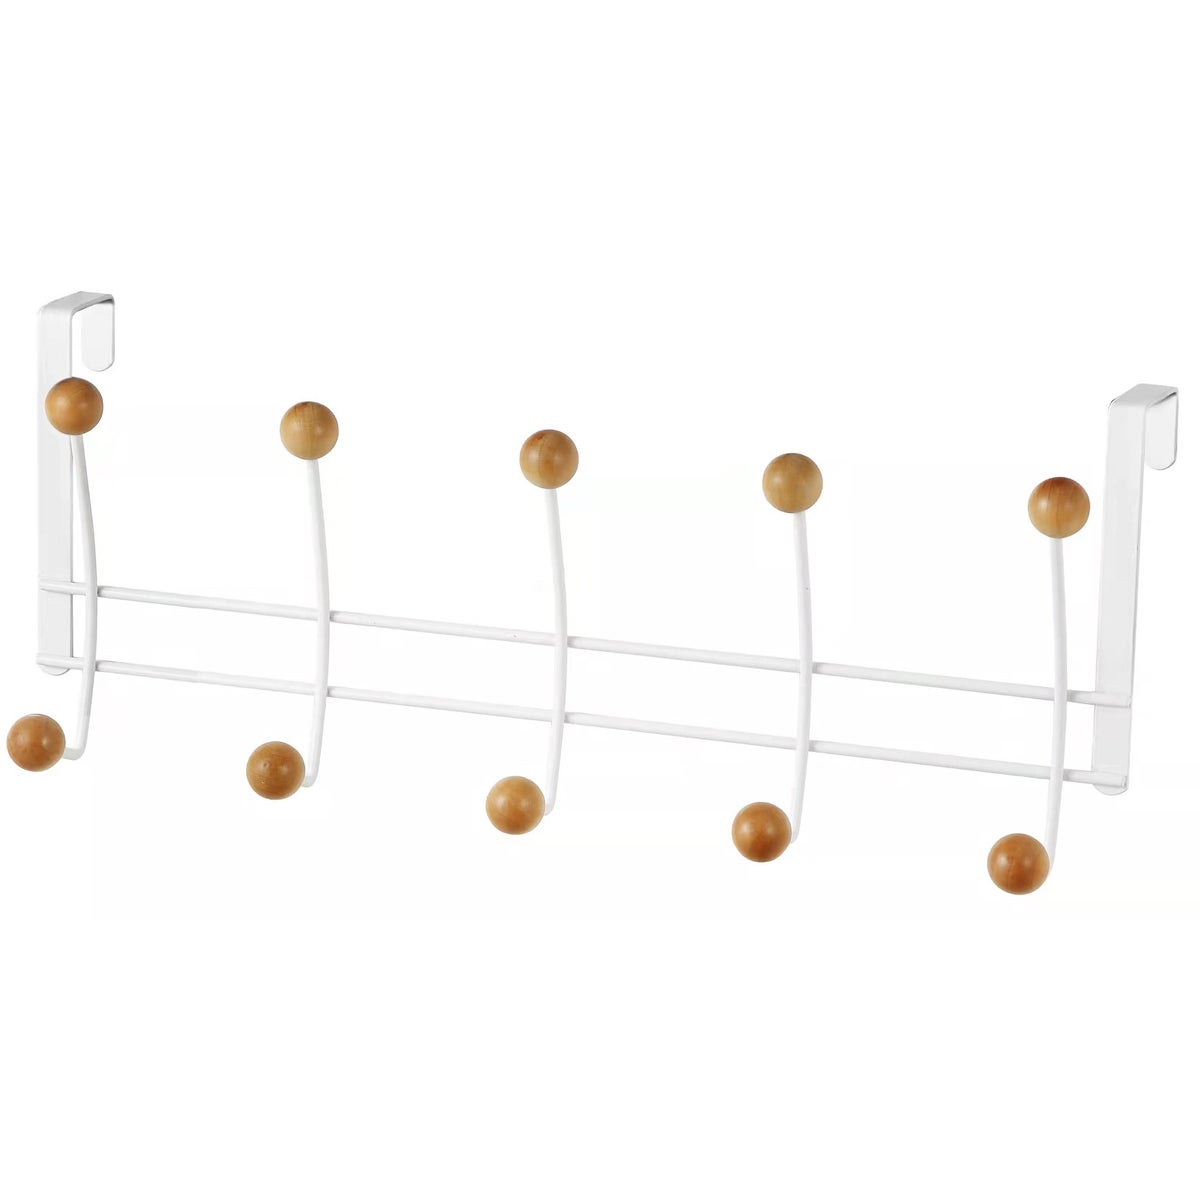 Chrome - Over-the-Door 10 Hook Rack with Ceramic Knobs (12)